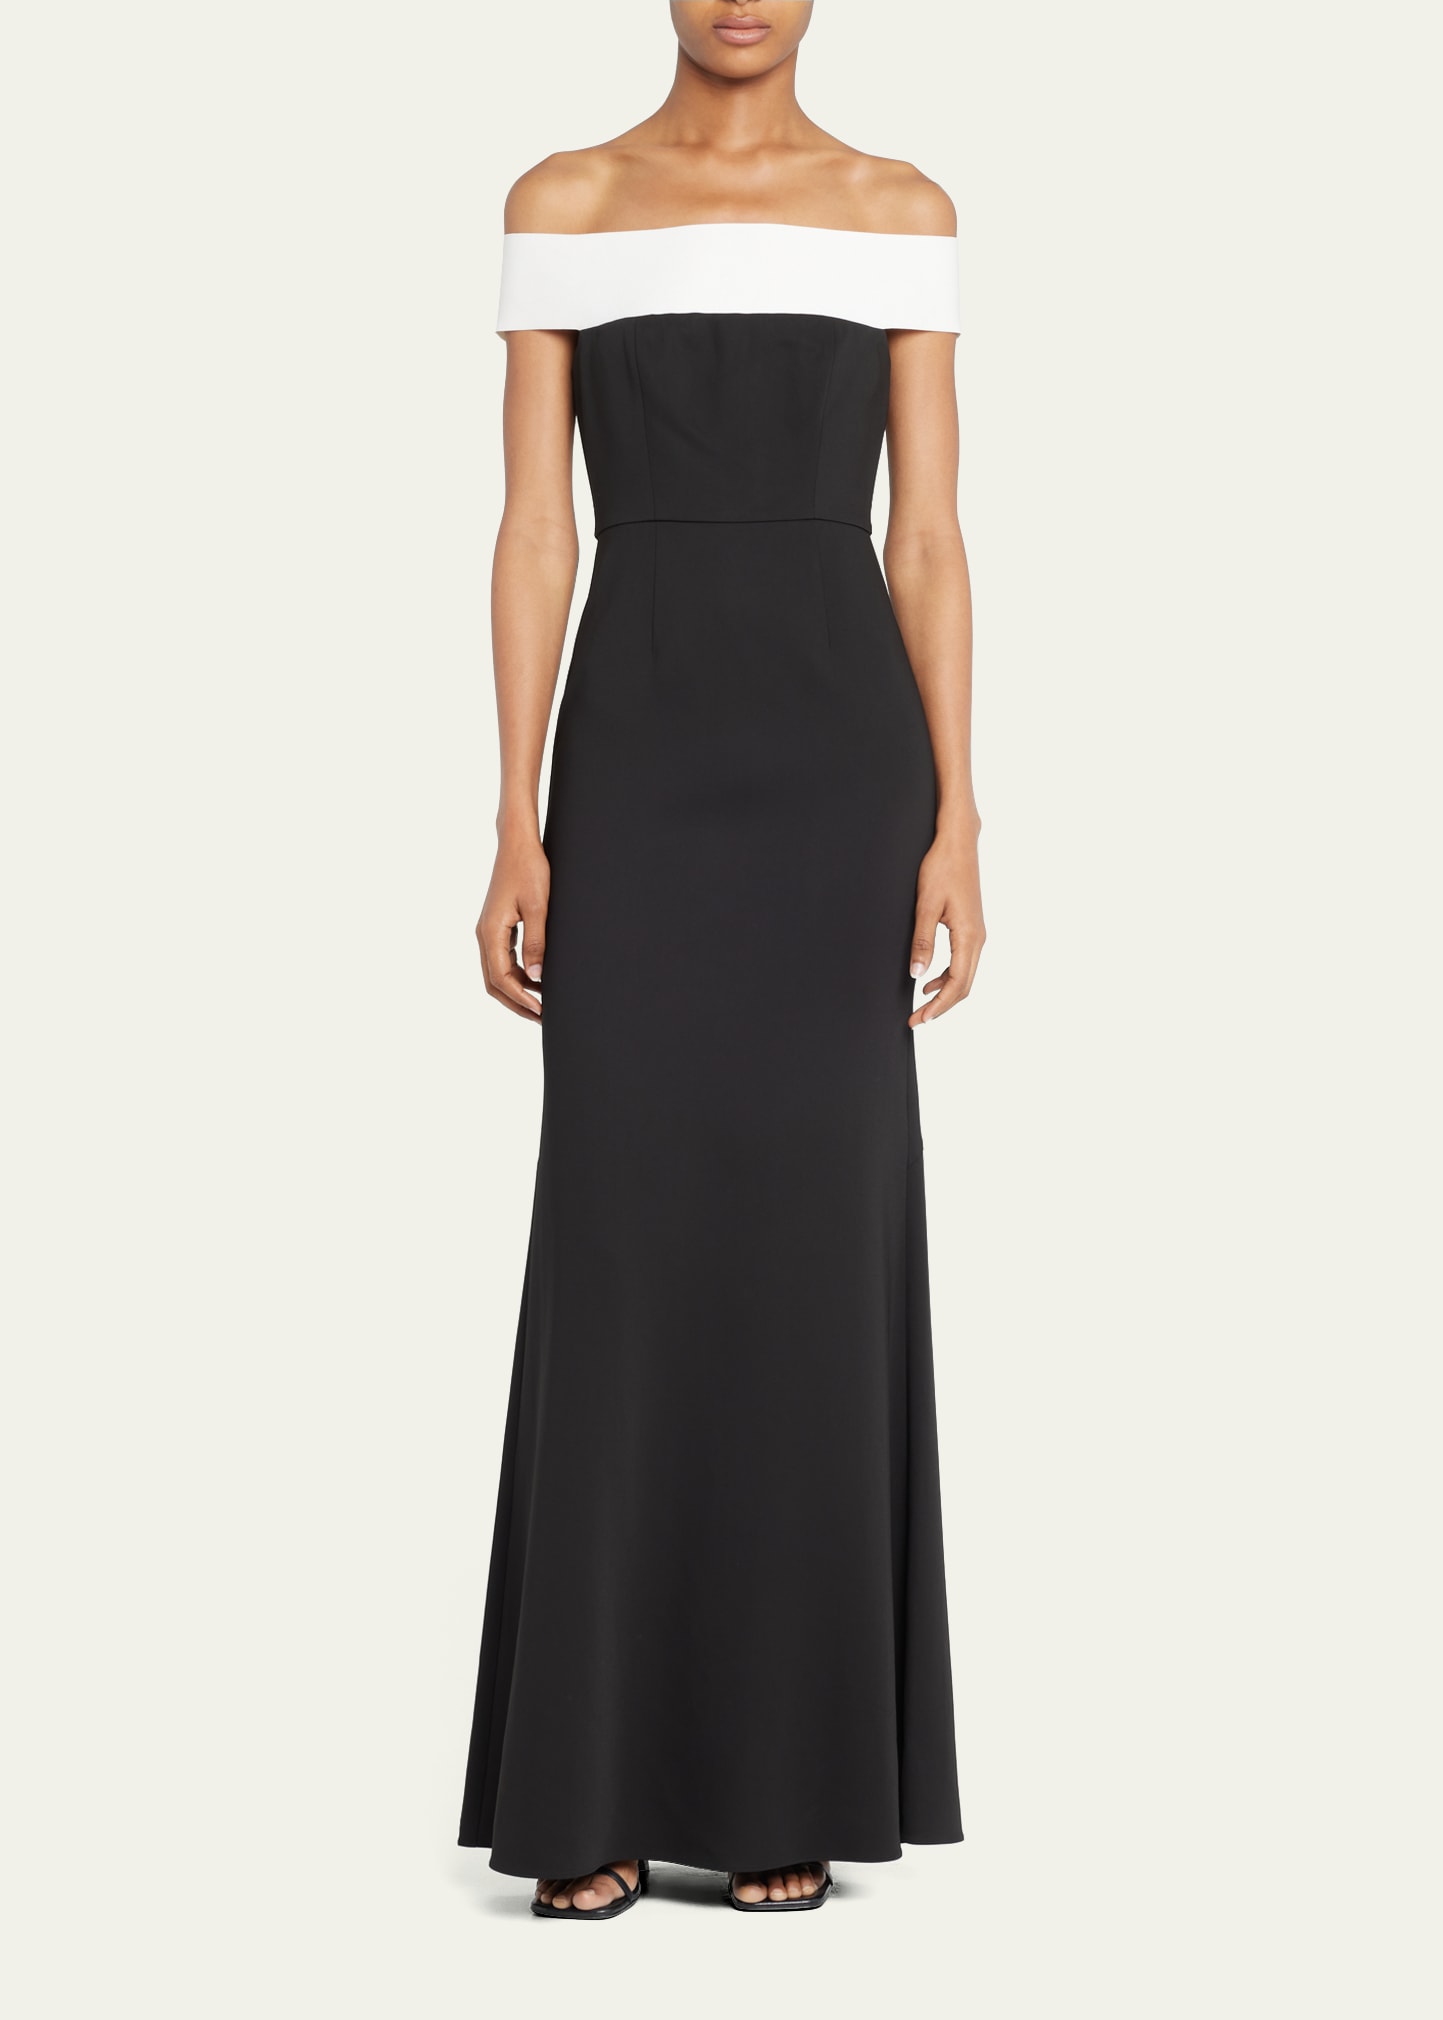 Contrast Off-the-Shoulder Cady Gown